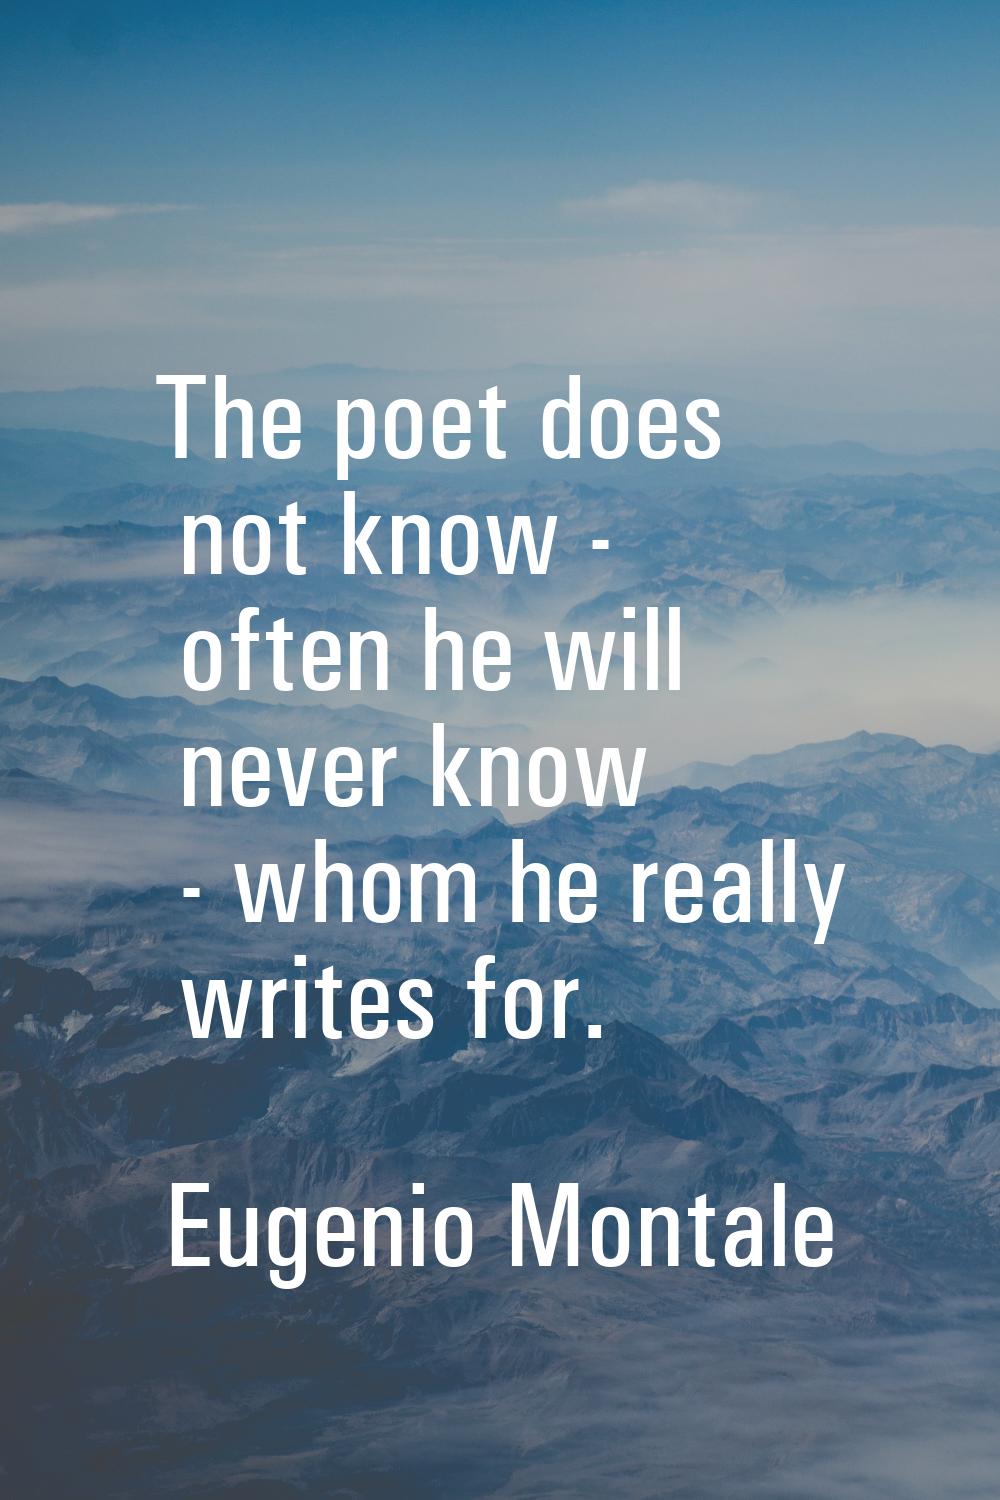 The poet does not know - often he will never know - whom he really writes for.